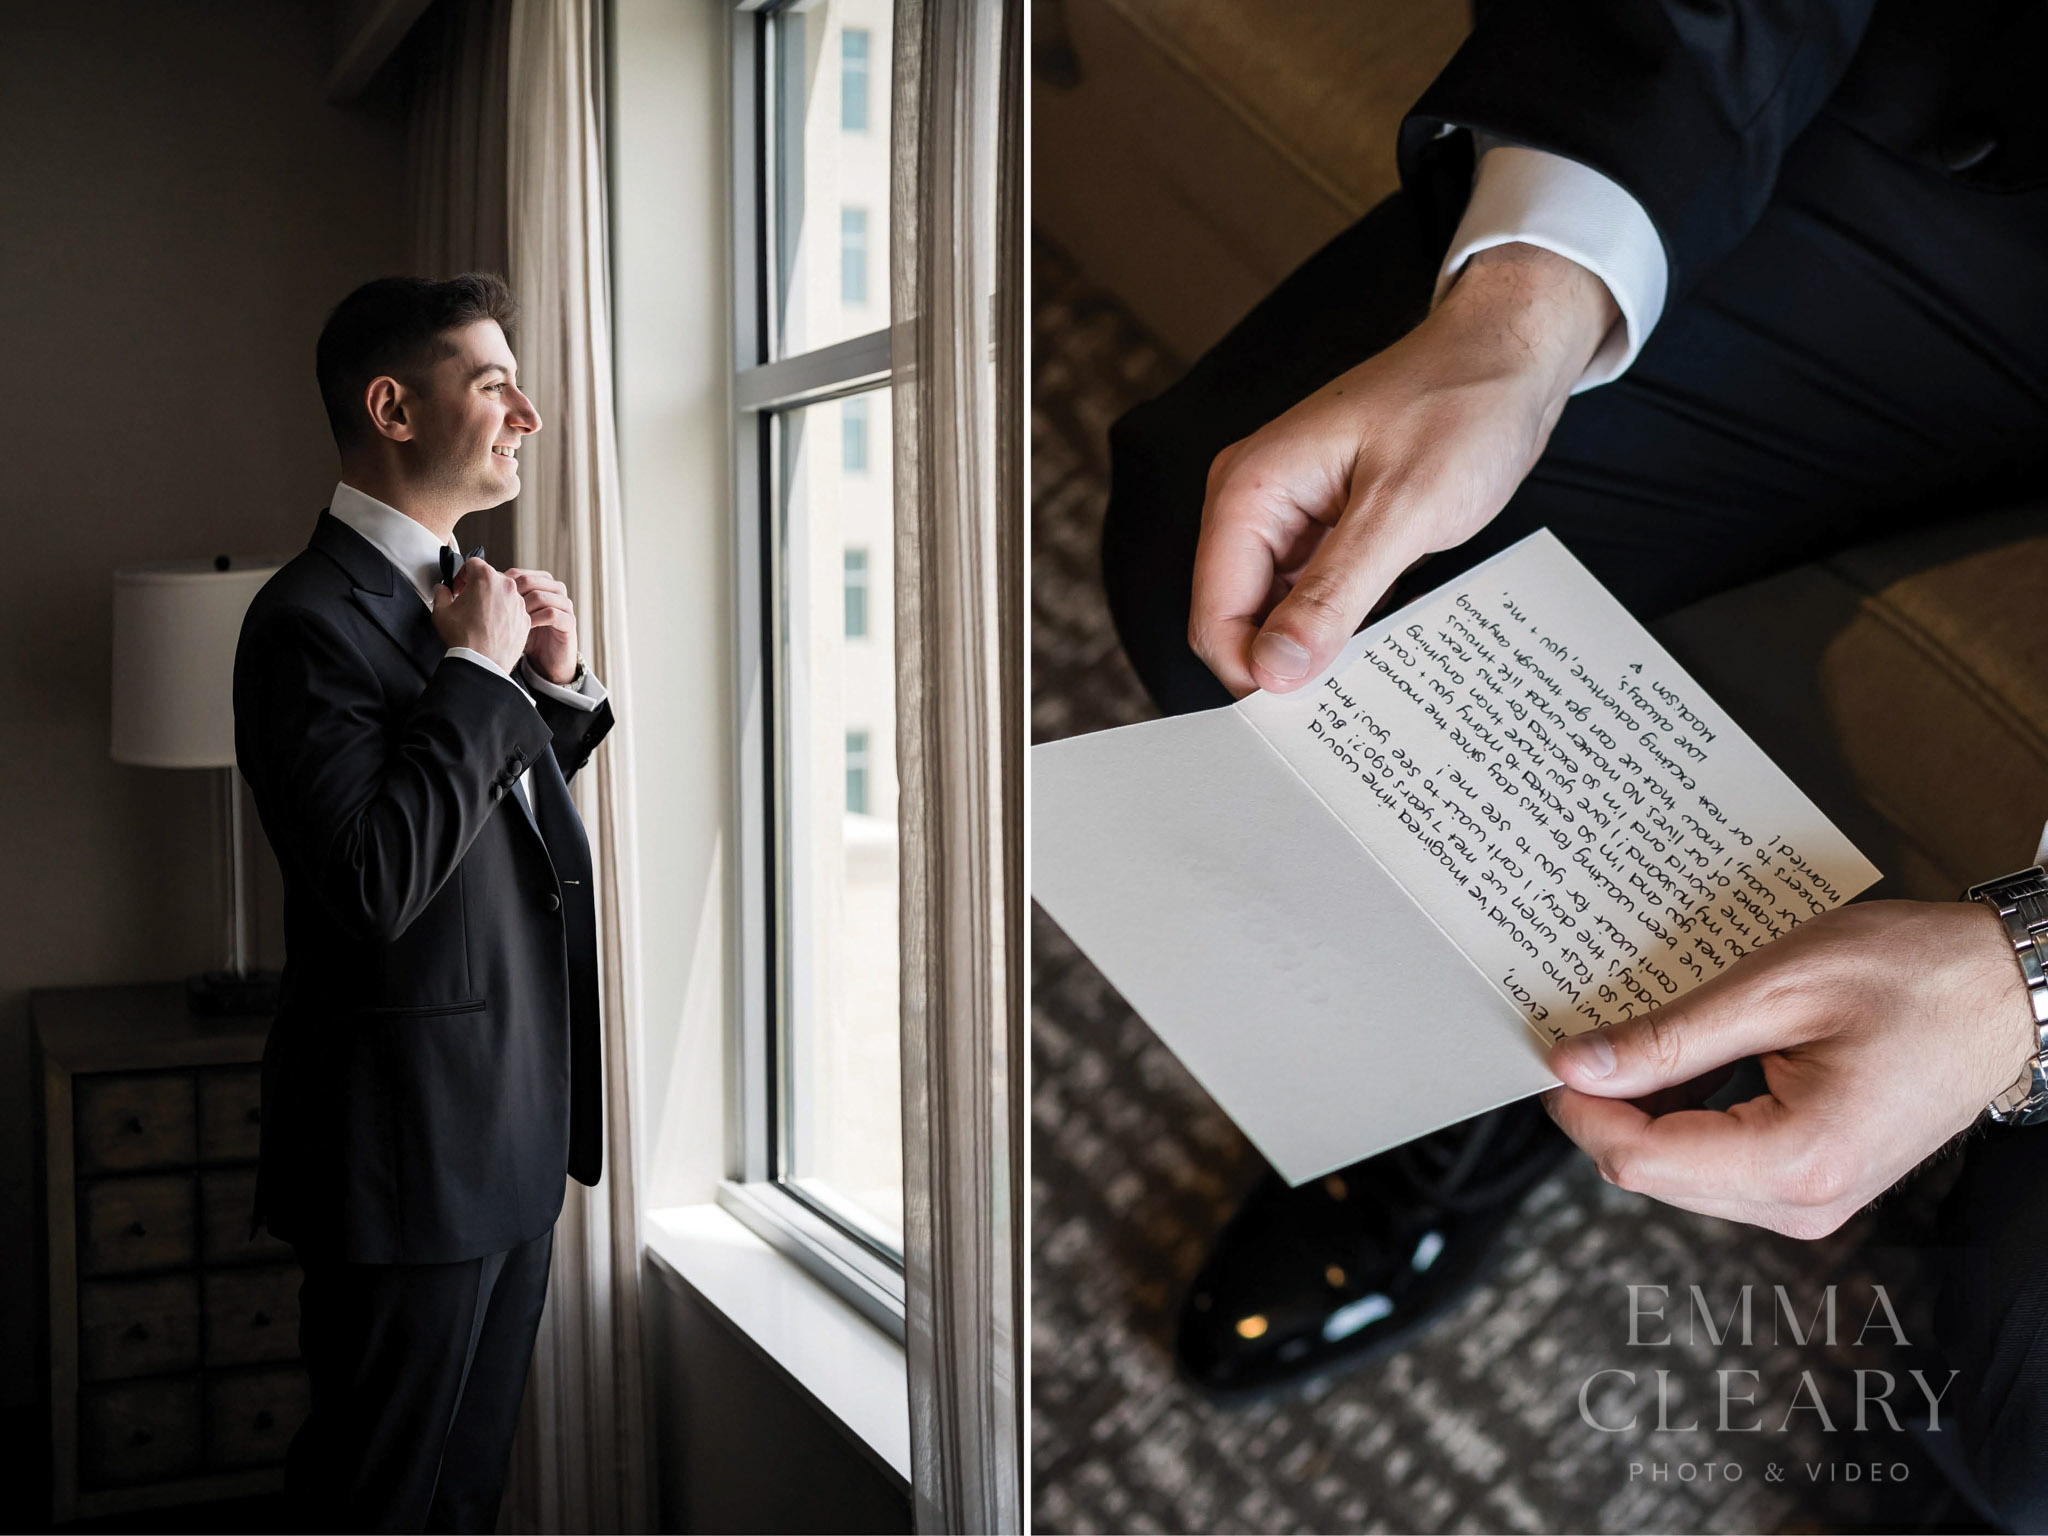 The groom and the letter